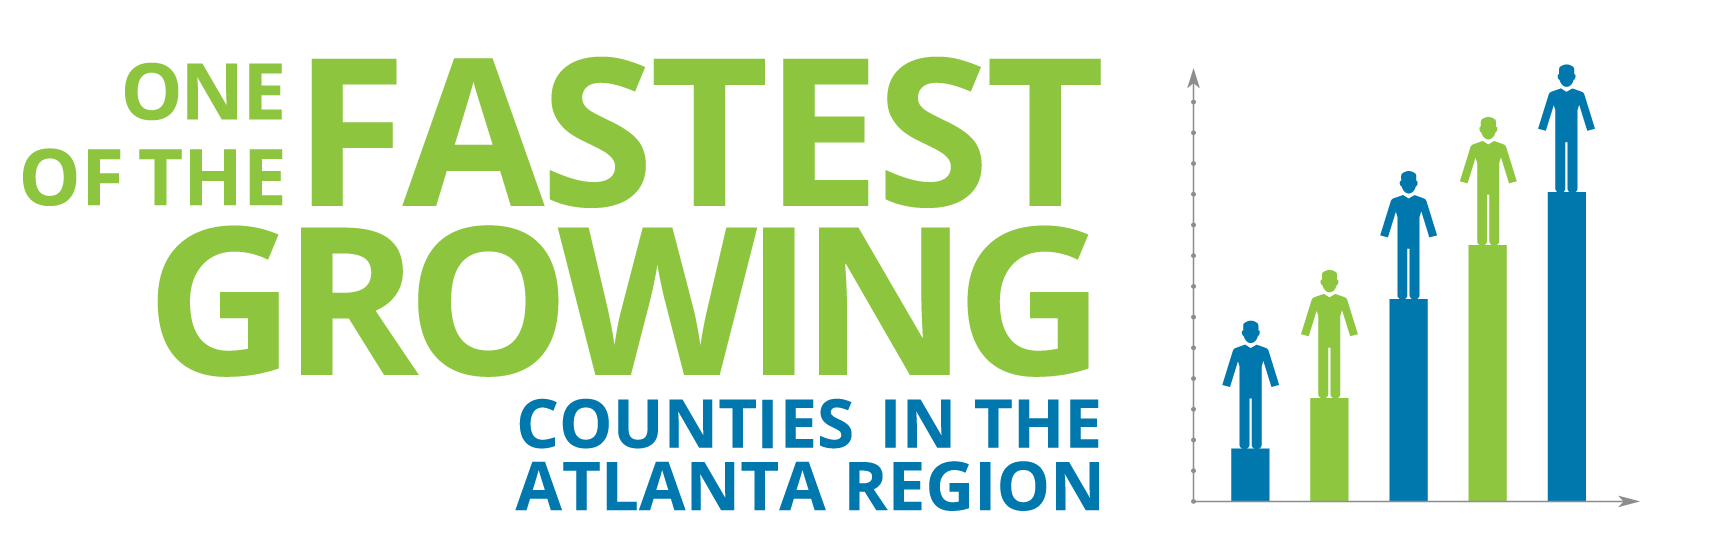 Cherokee County is one of the fastest growing counties in the Atlanta region